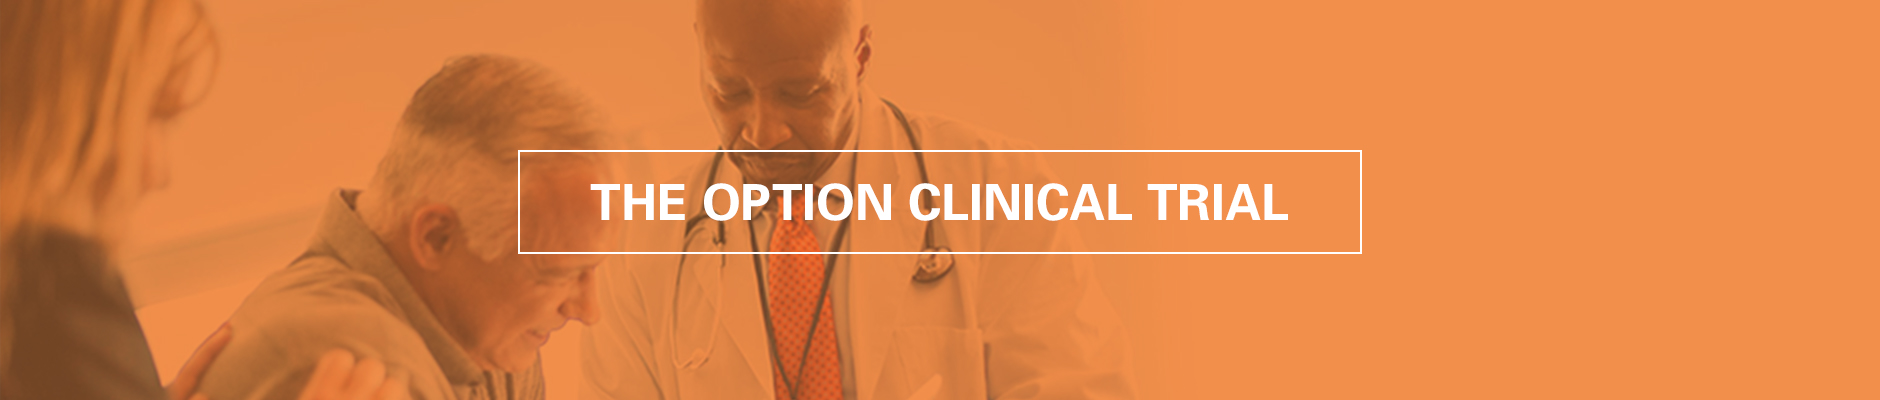 The OPTION Clinical Trial